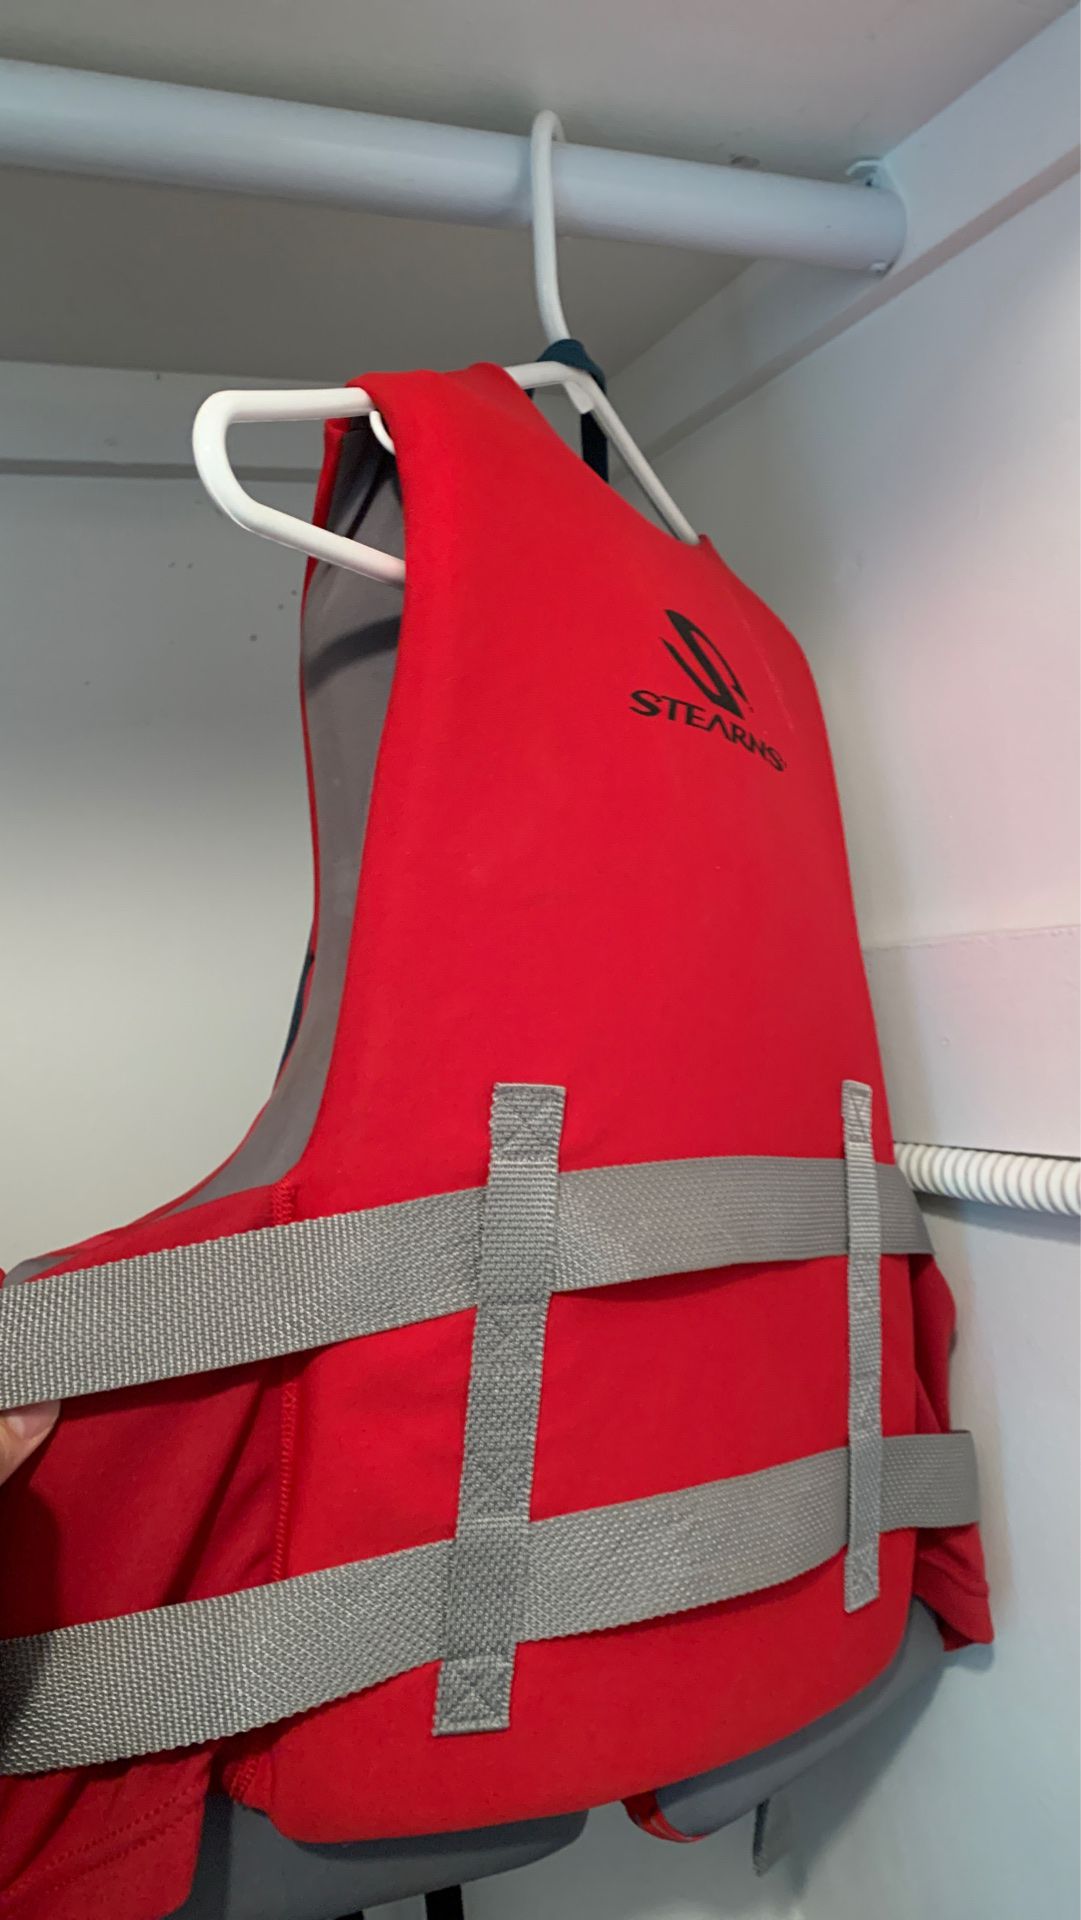 Hardly used life jacket (Stearns brand)